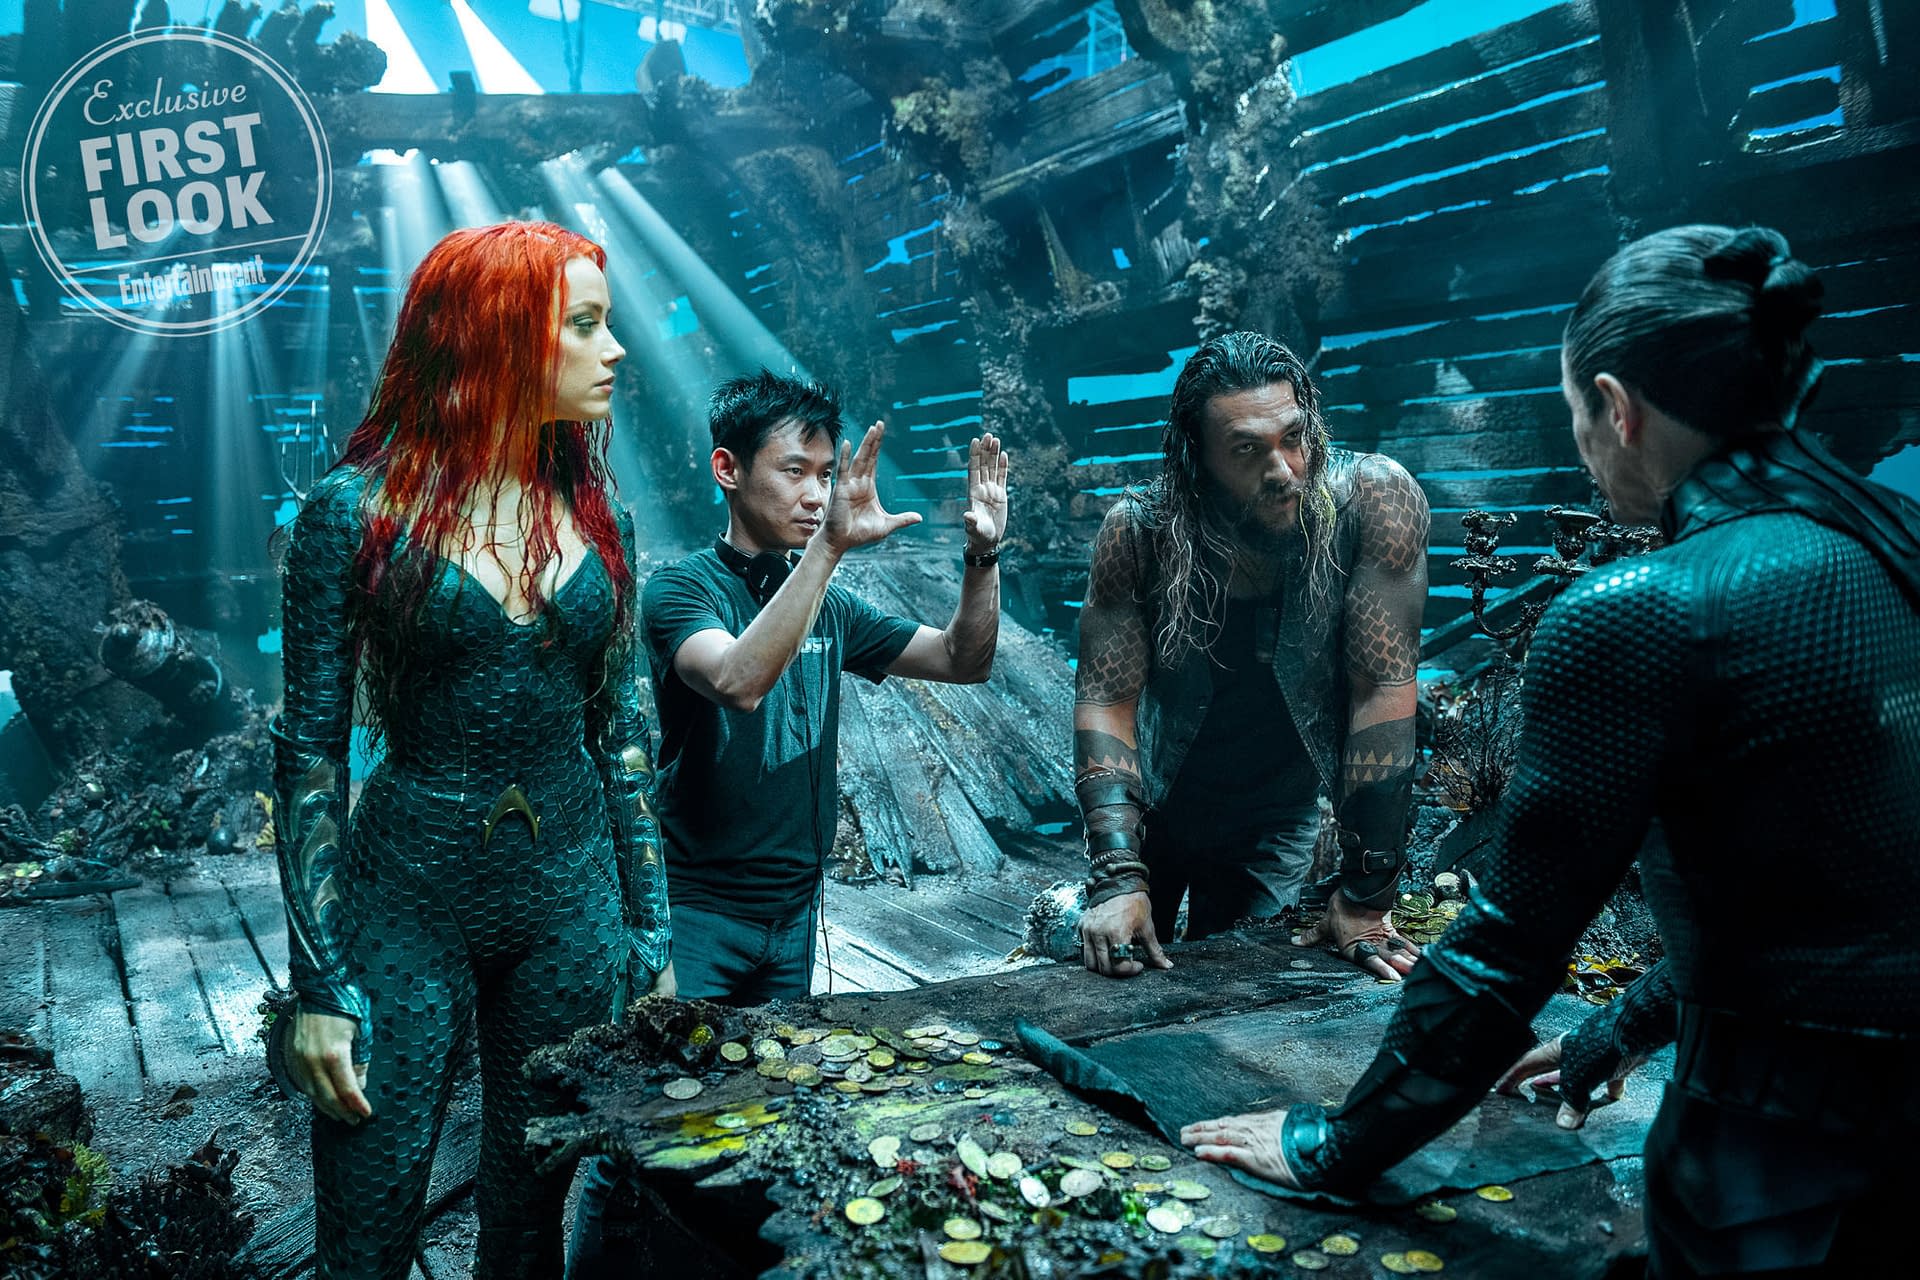 Director James Wan Talks About the Tone of Aquaman